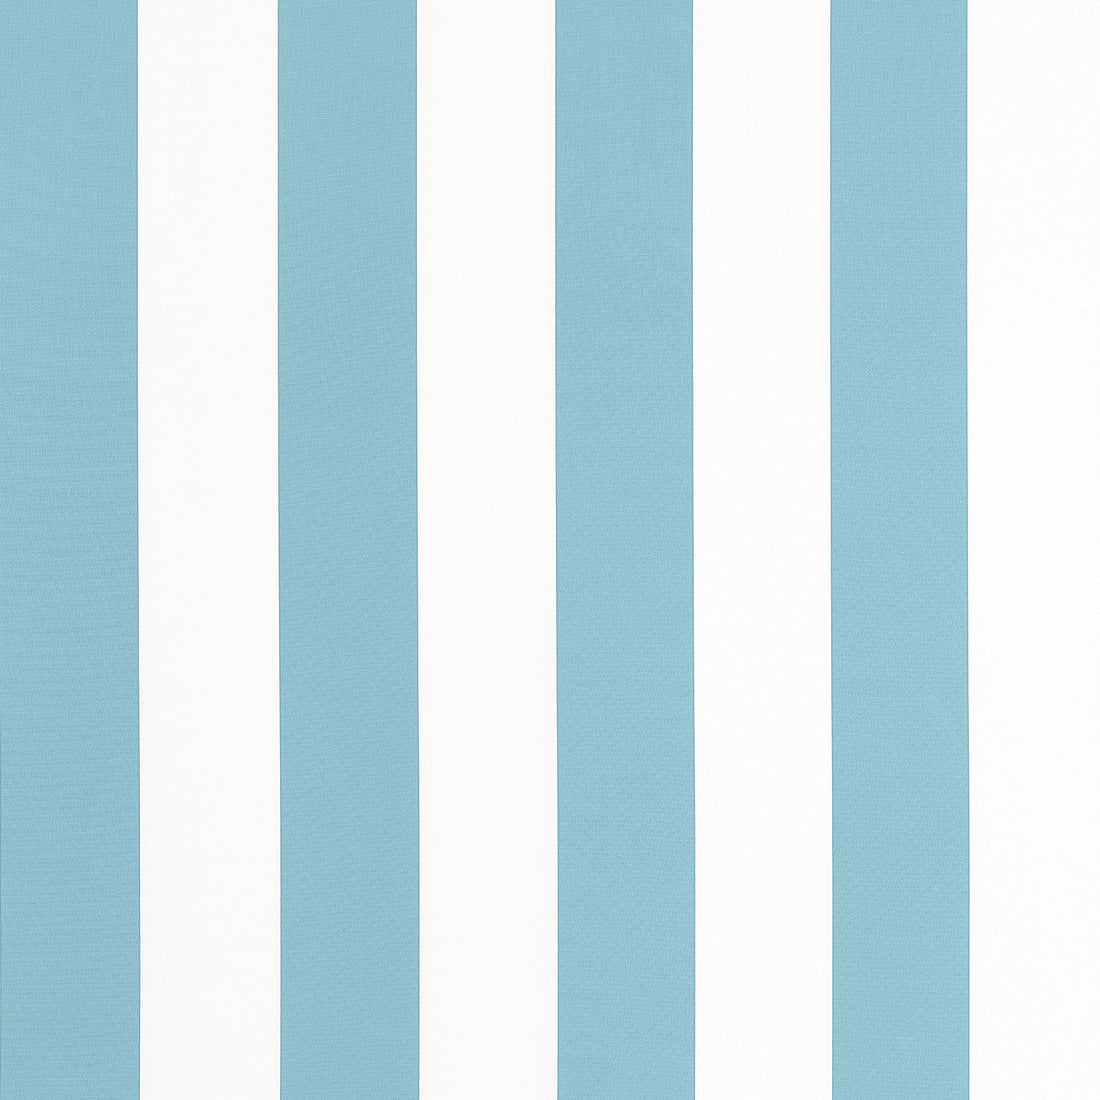 Cabana Stripe fabric in spa blue color - pattern number W81635 - by Thibaut in the Locale collection